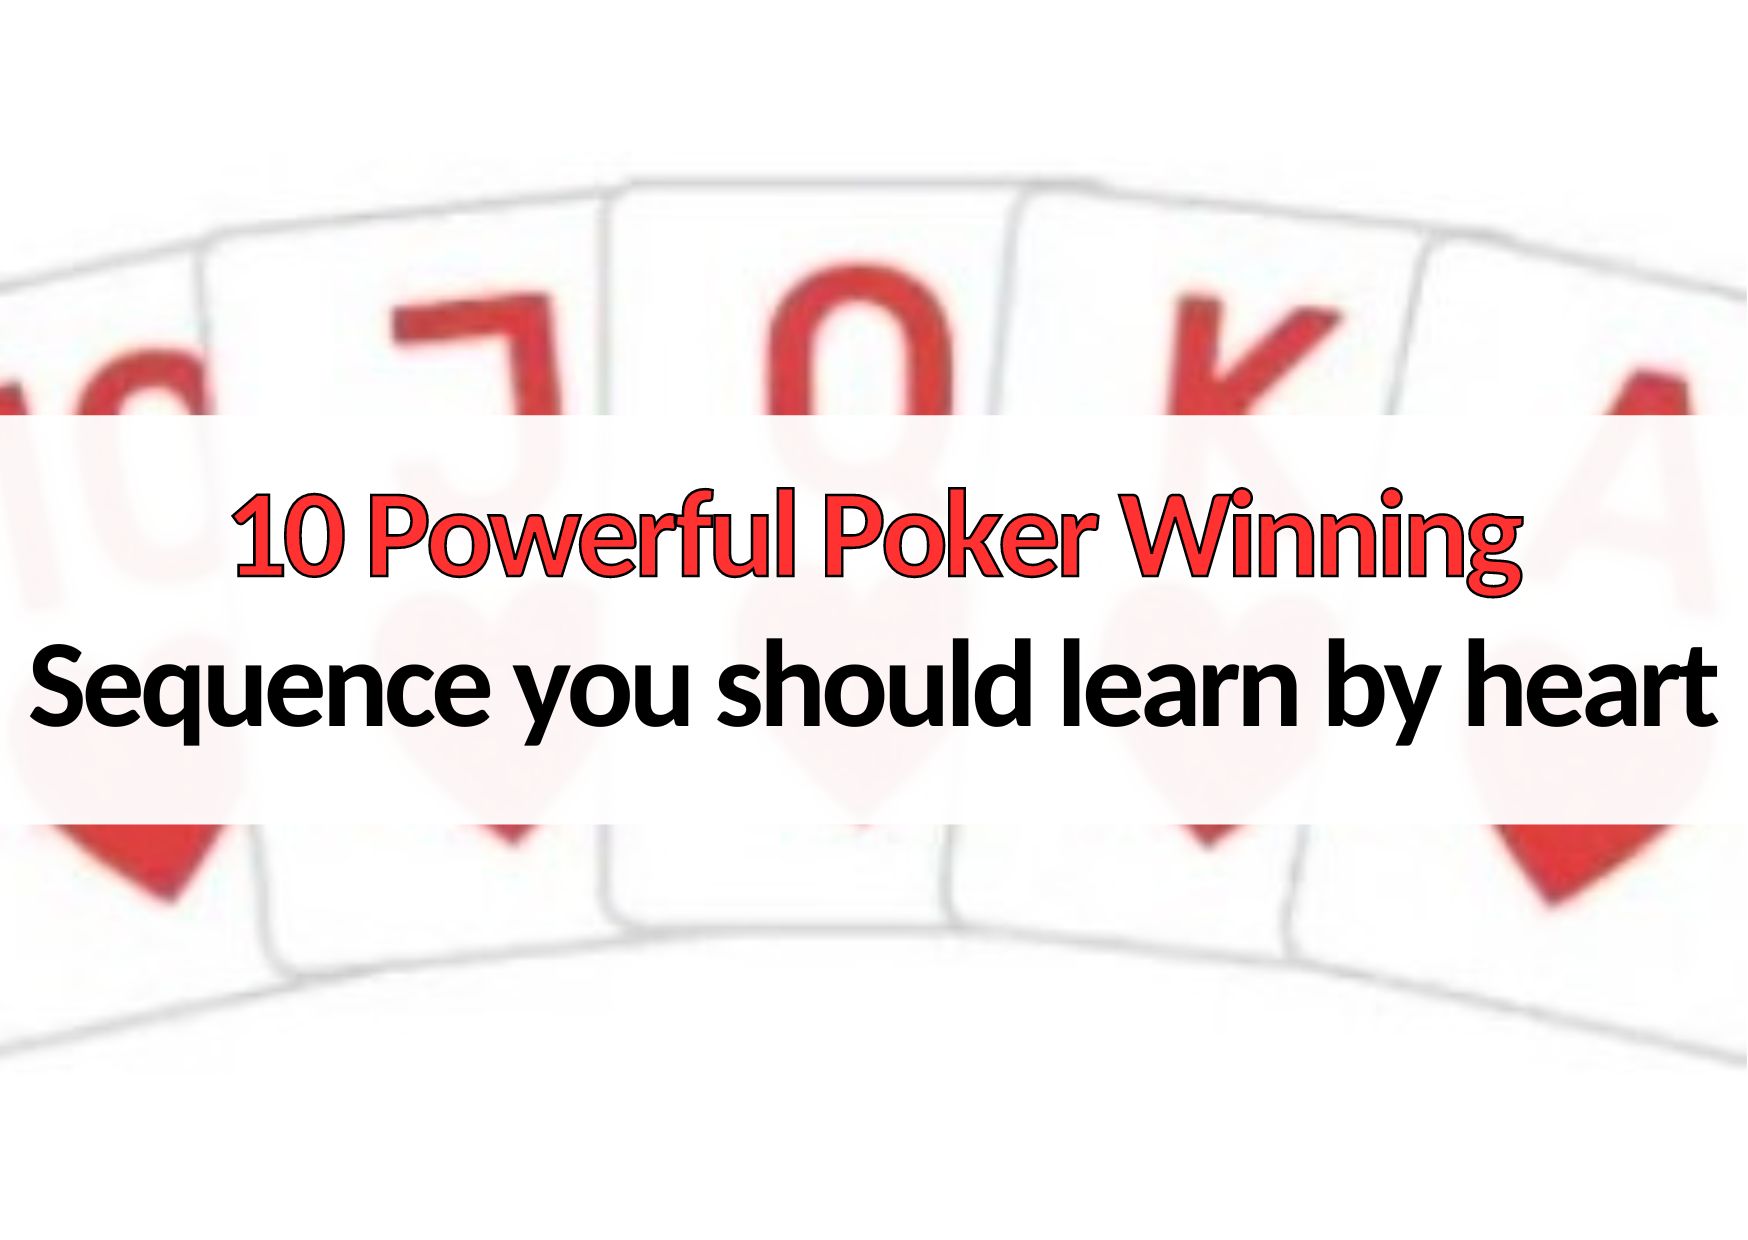 10 powerful poker winning sequence you should learn by heart